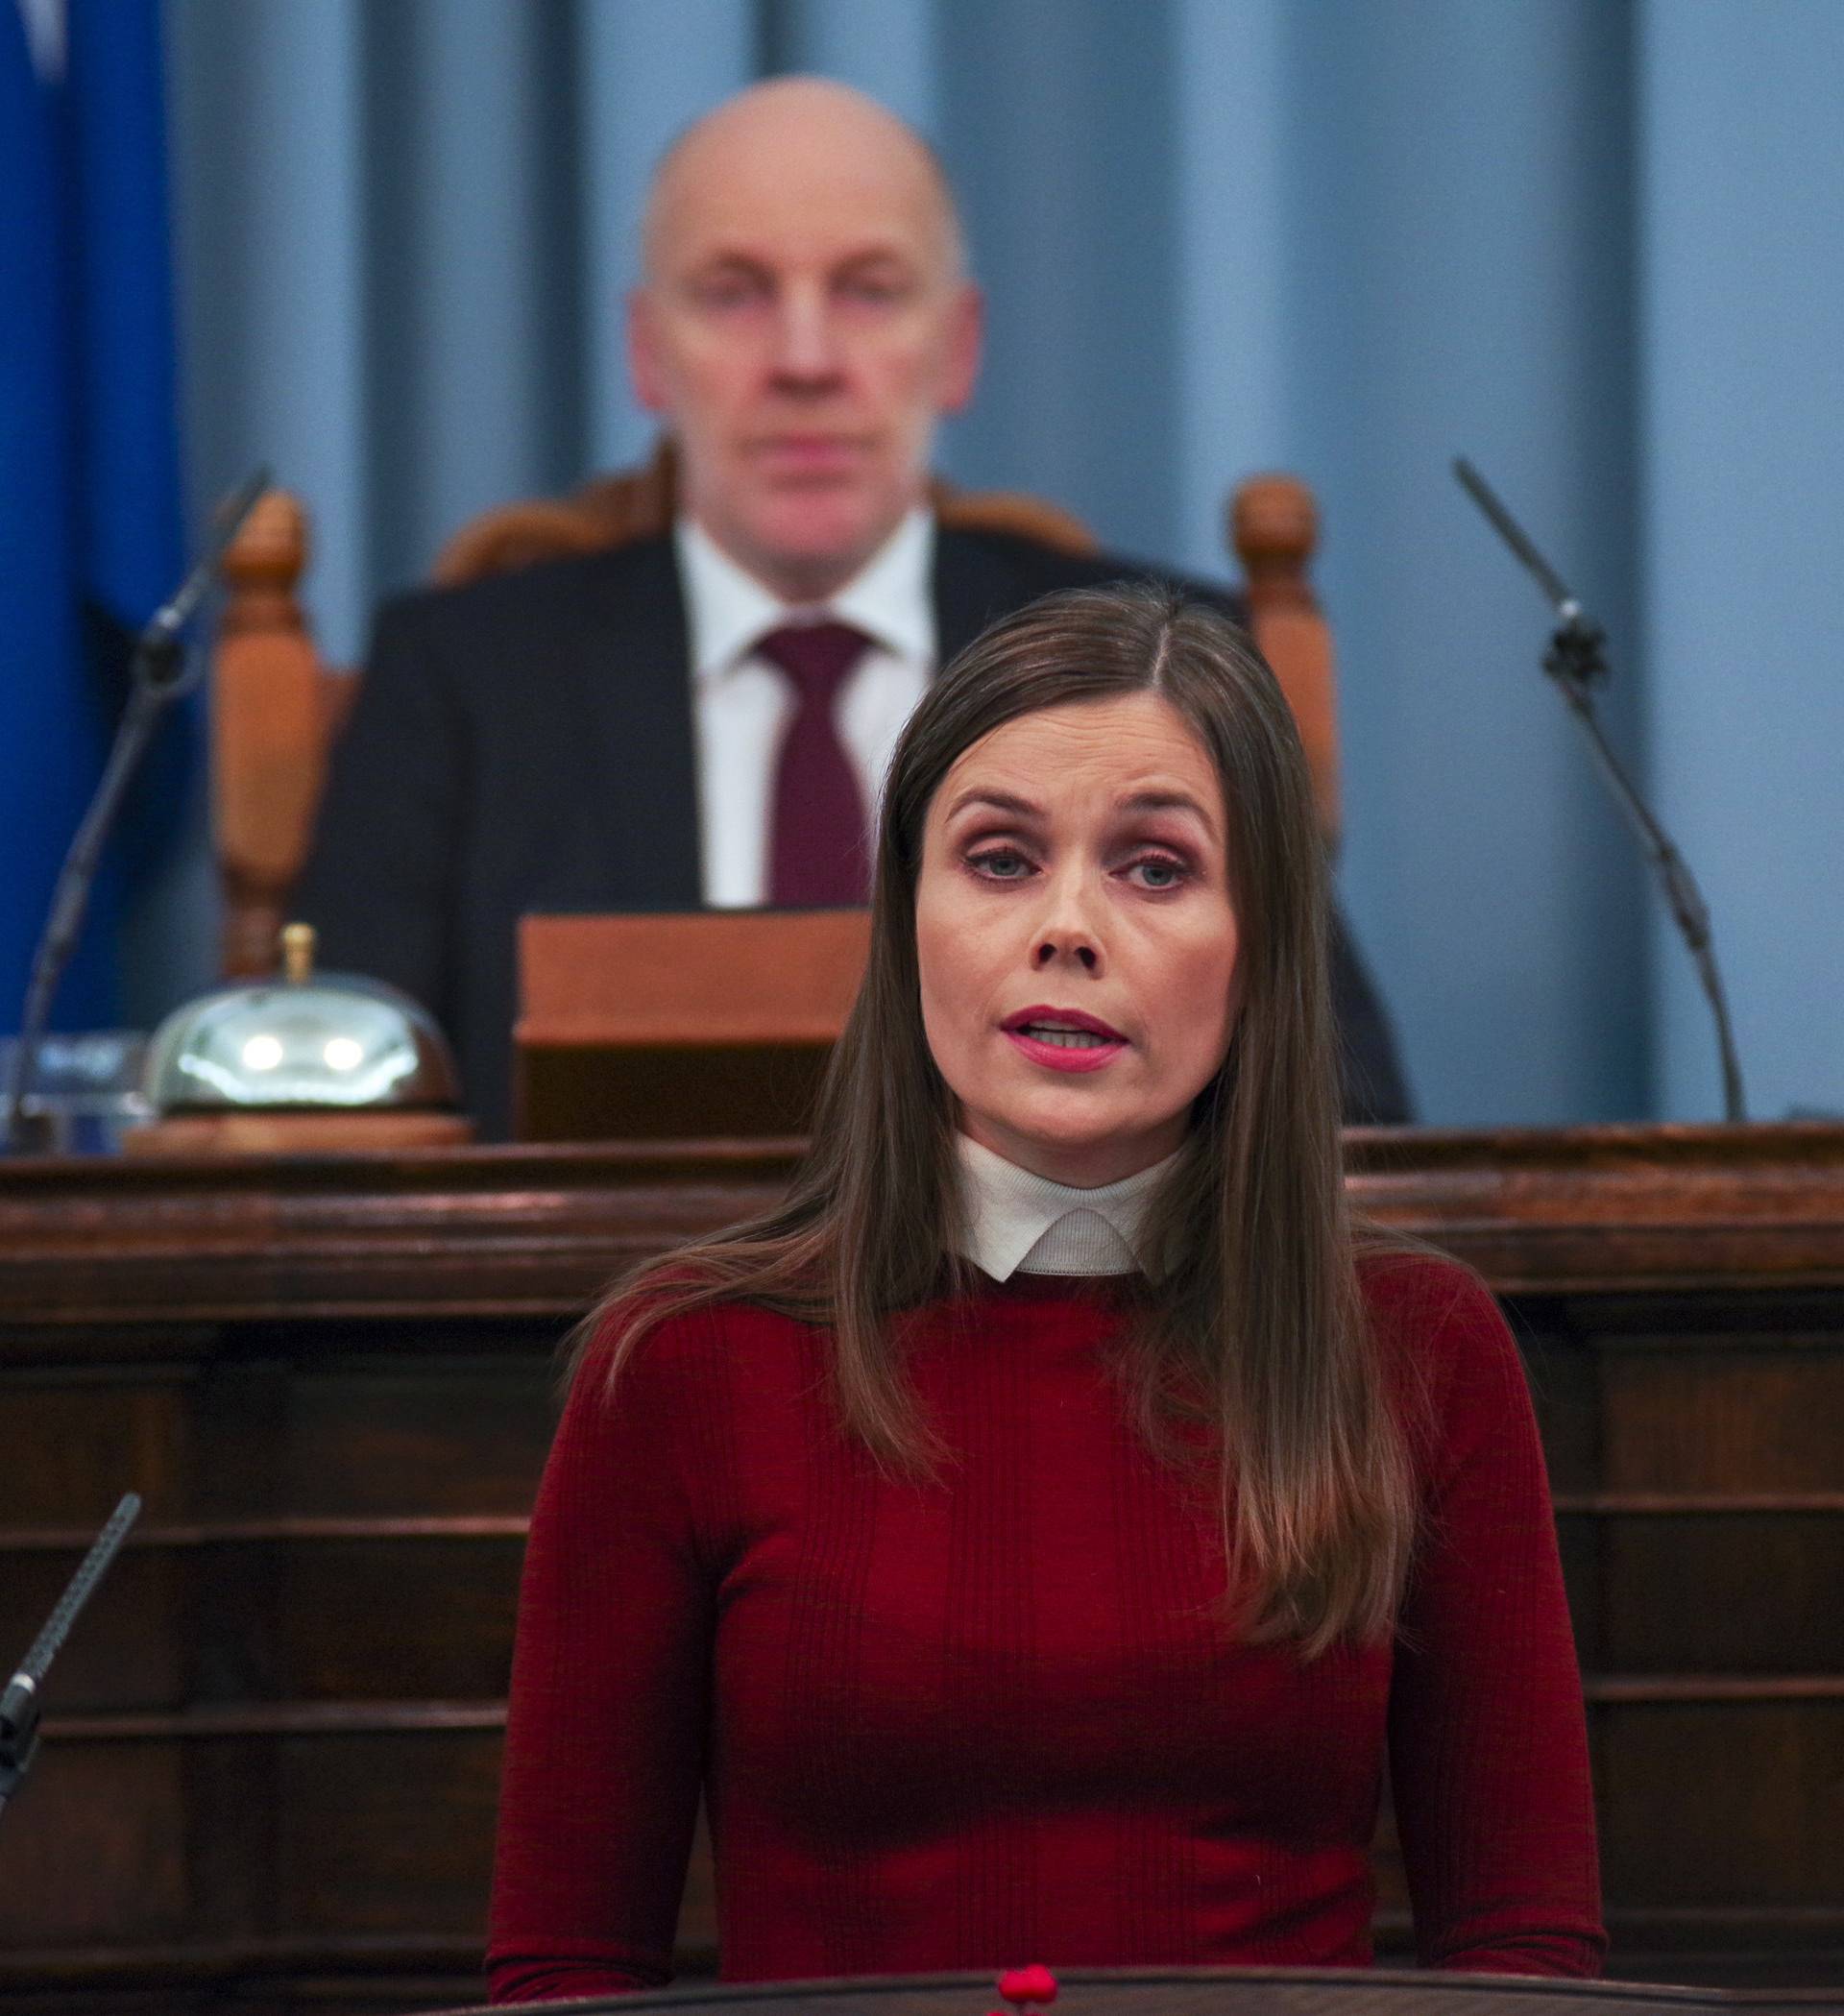 Iceland's Prime Minister Jakobsdottir delivers a speech at the first session of a newly elected Parliament in Reykjavik